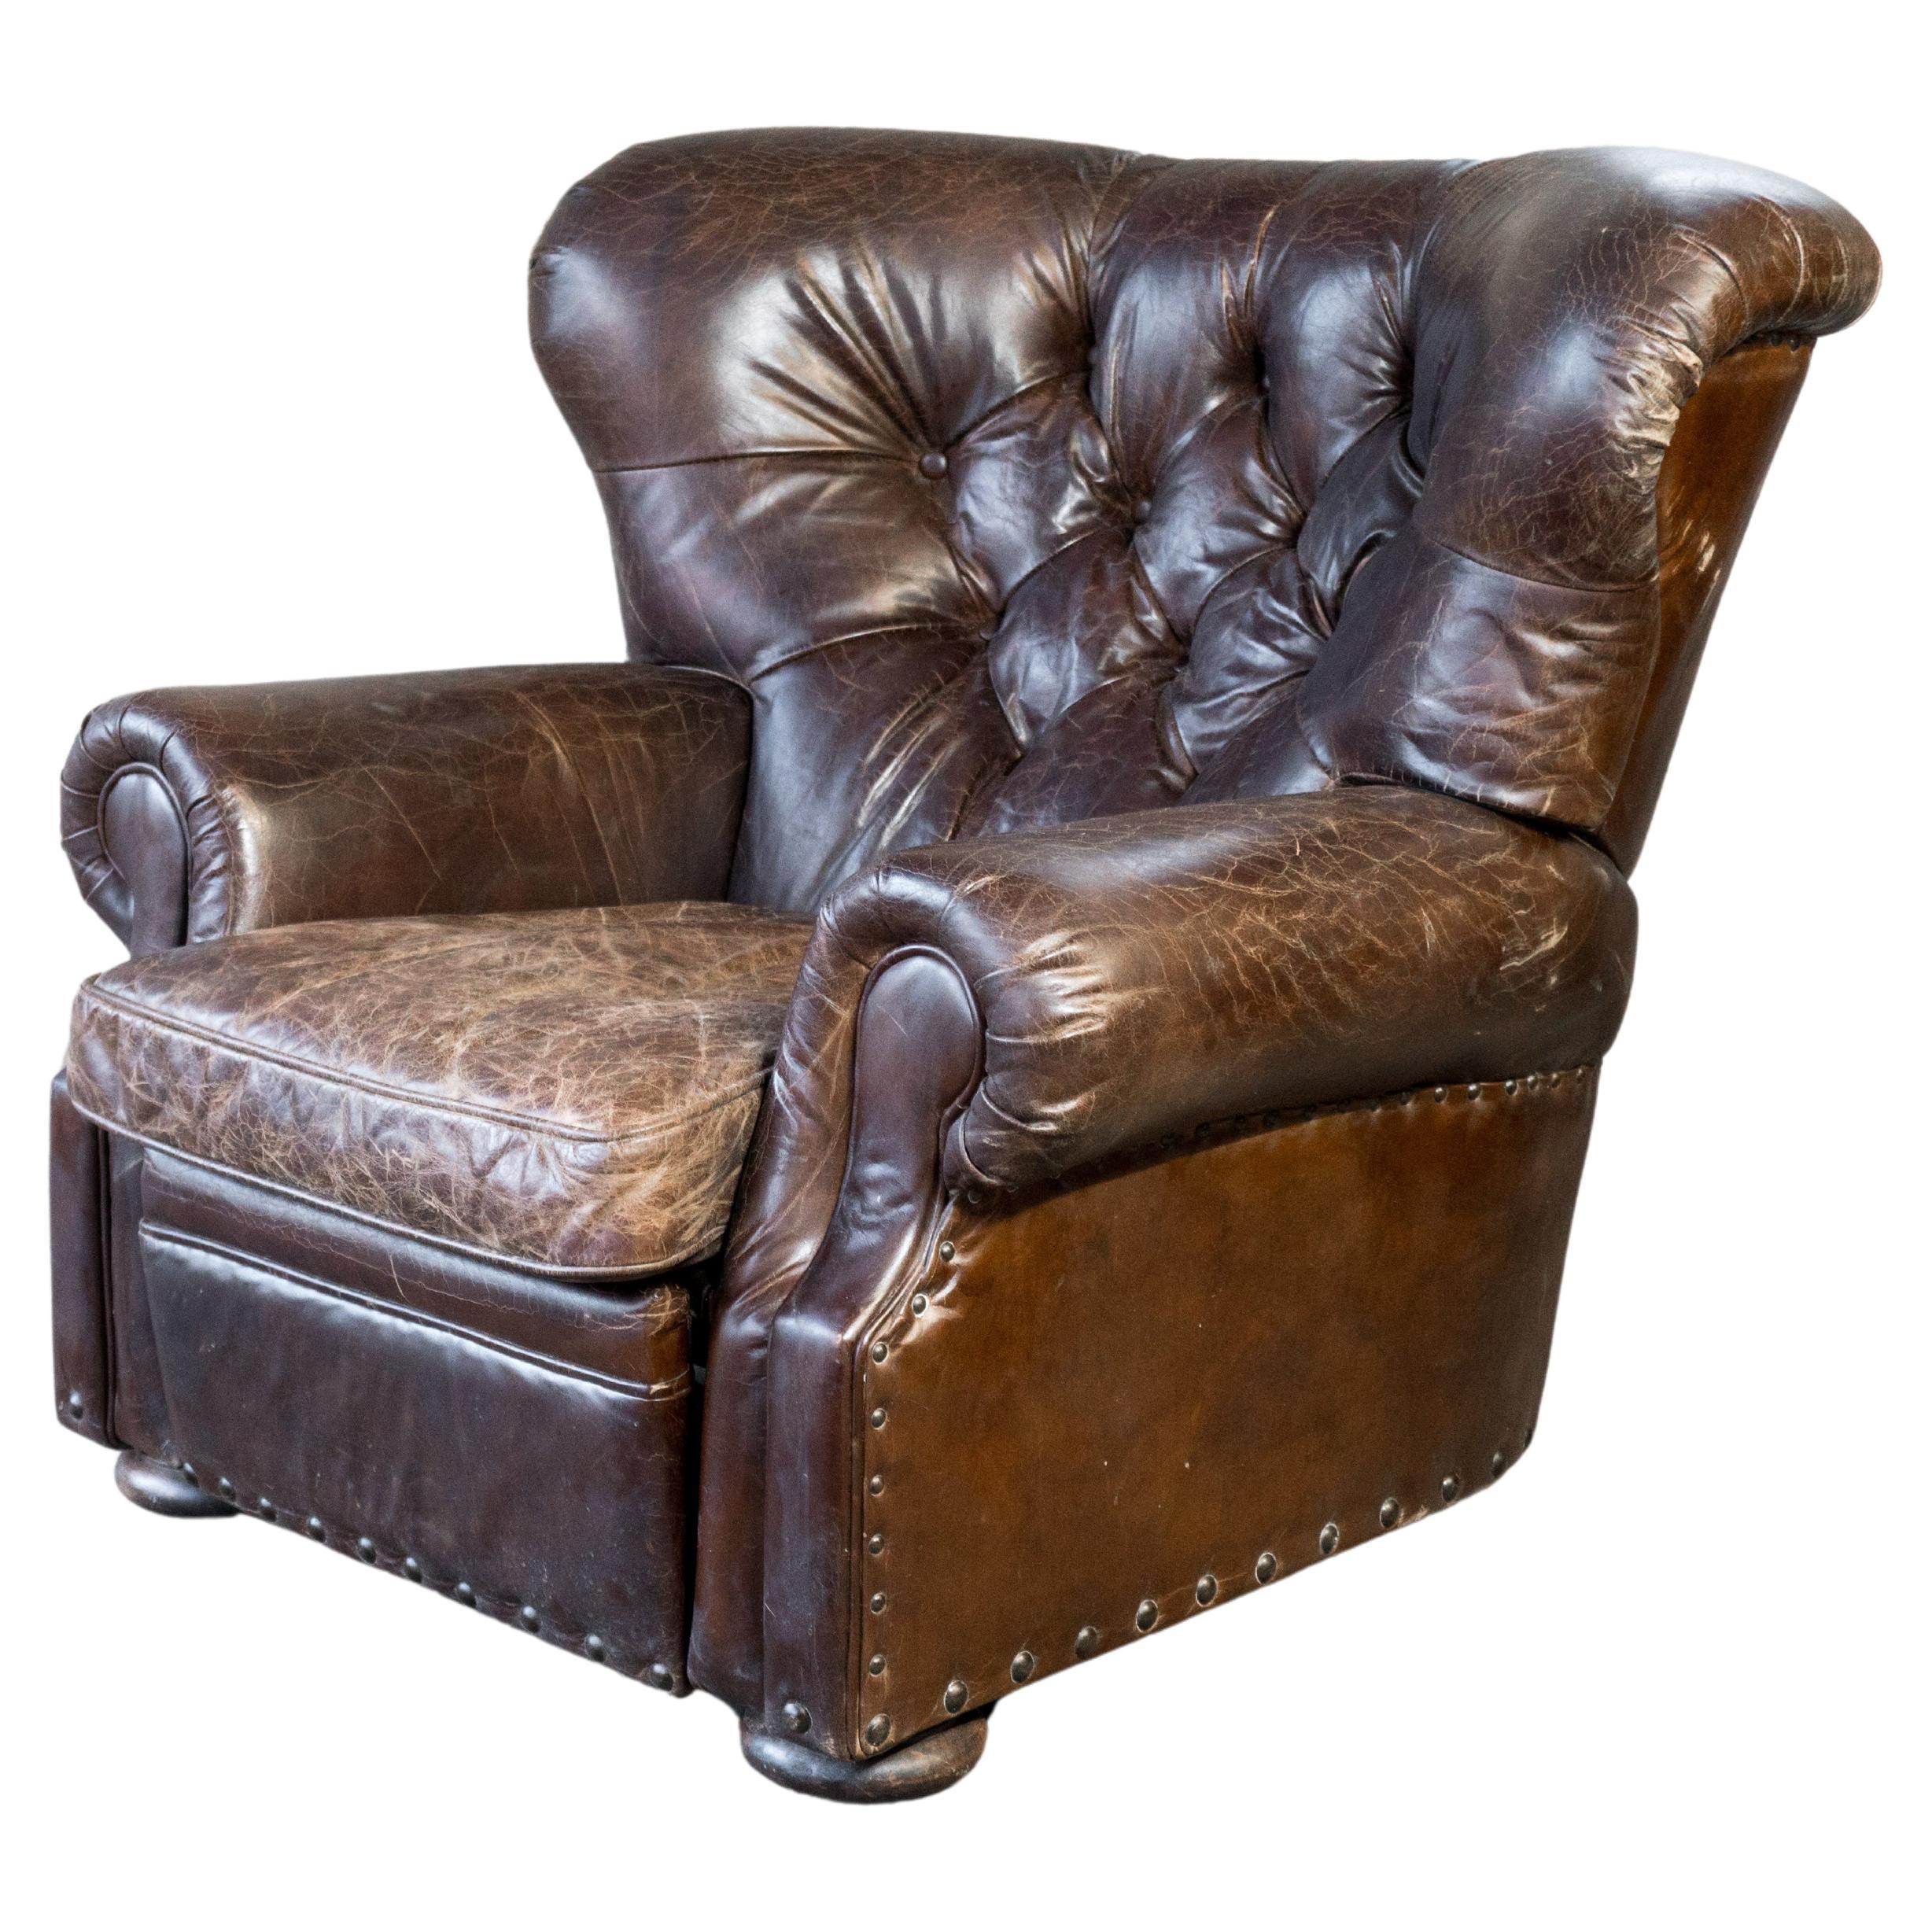 Restoration Hardware Churchill Brown Leather Recliner Chair With Nailheads Trim For Sale